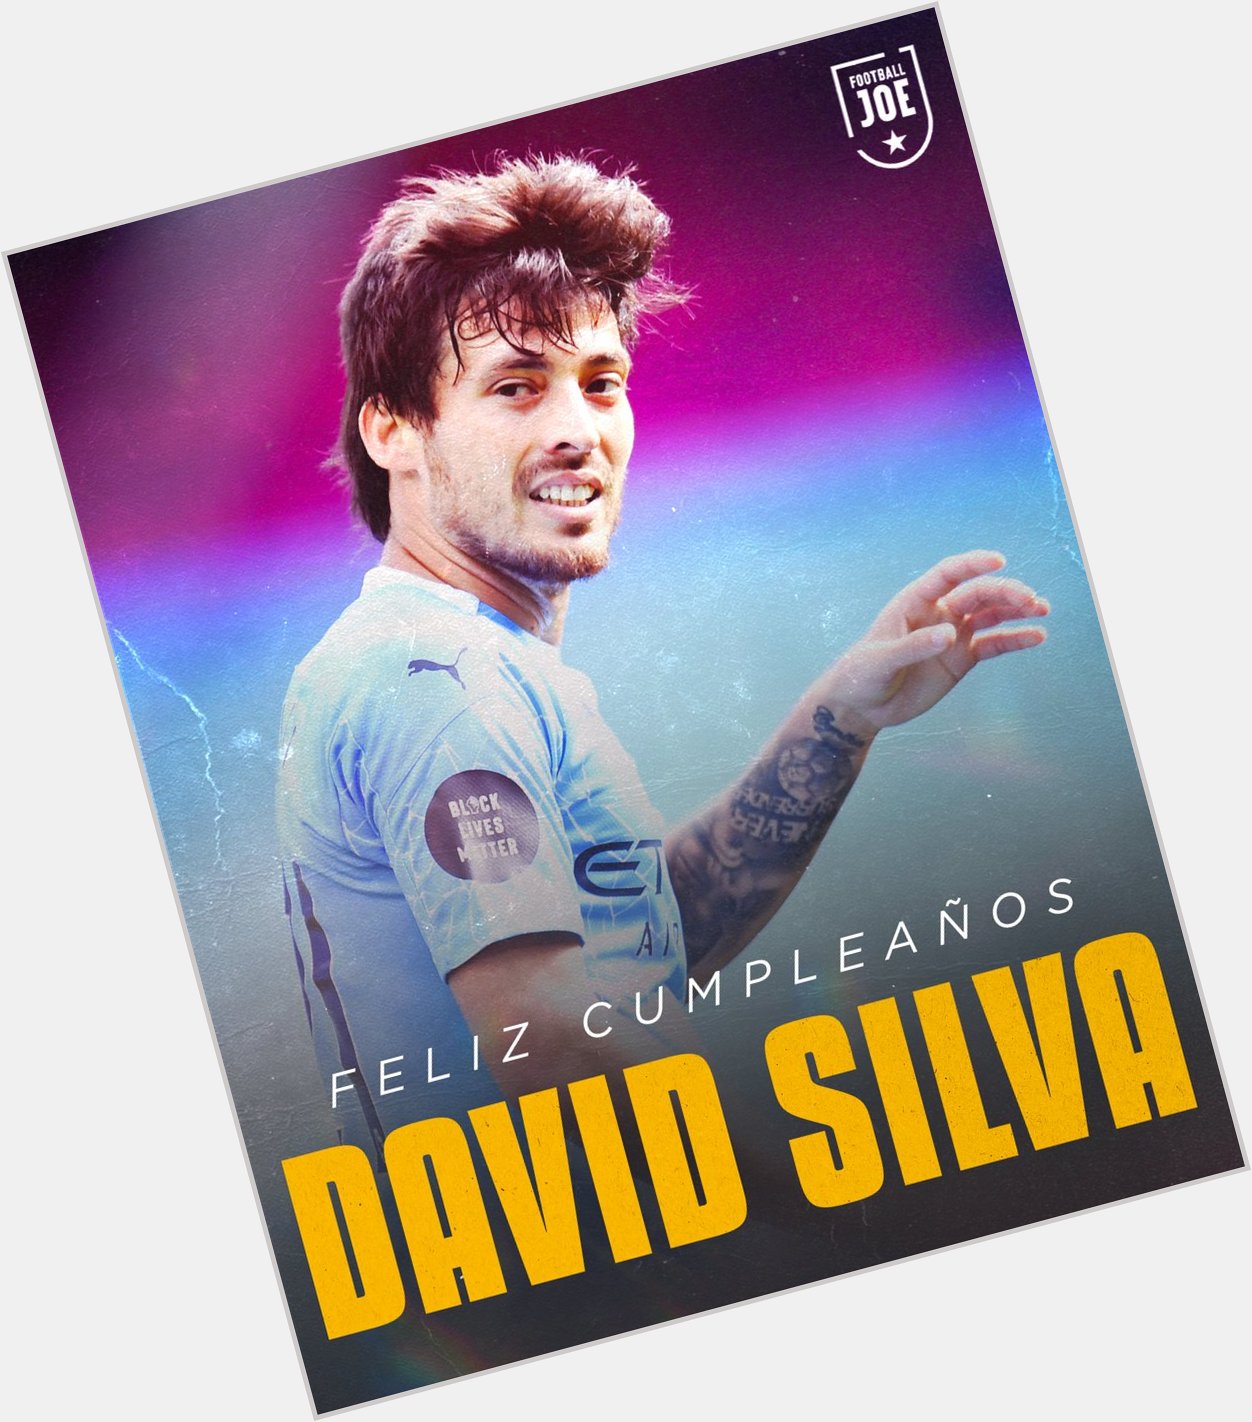 Happy 35th birthday to David Silva, one of the finest players ever to grace the Premier League  